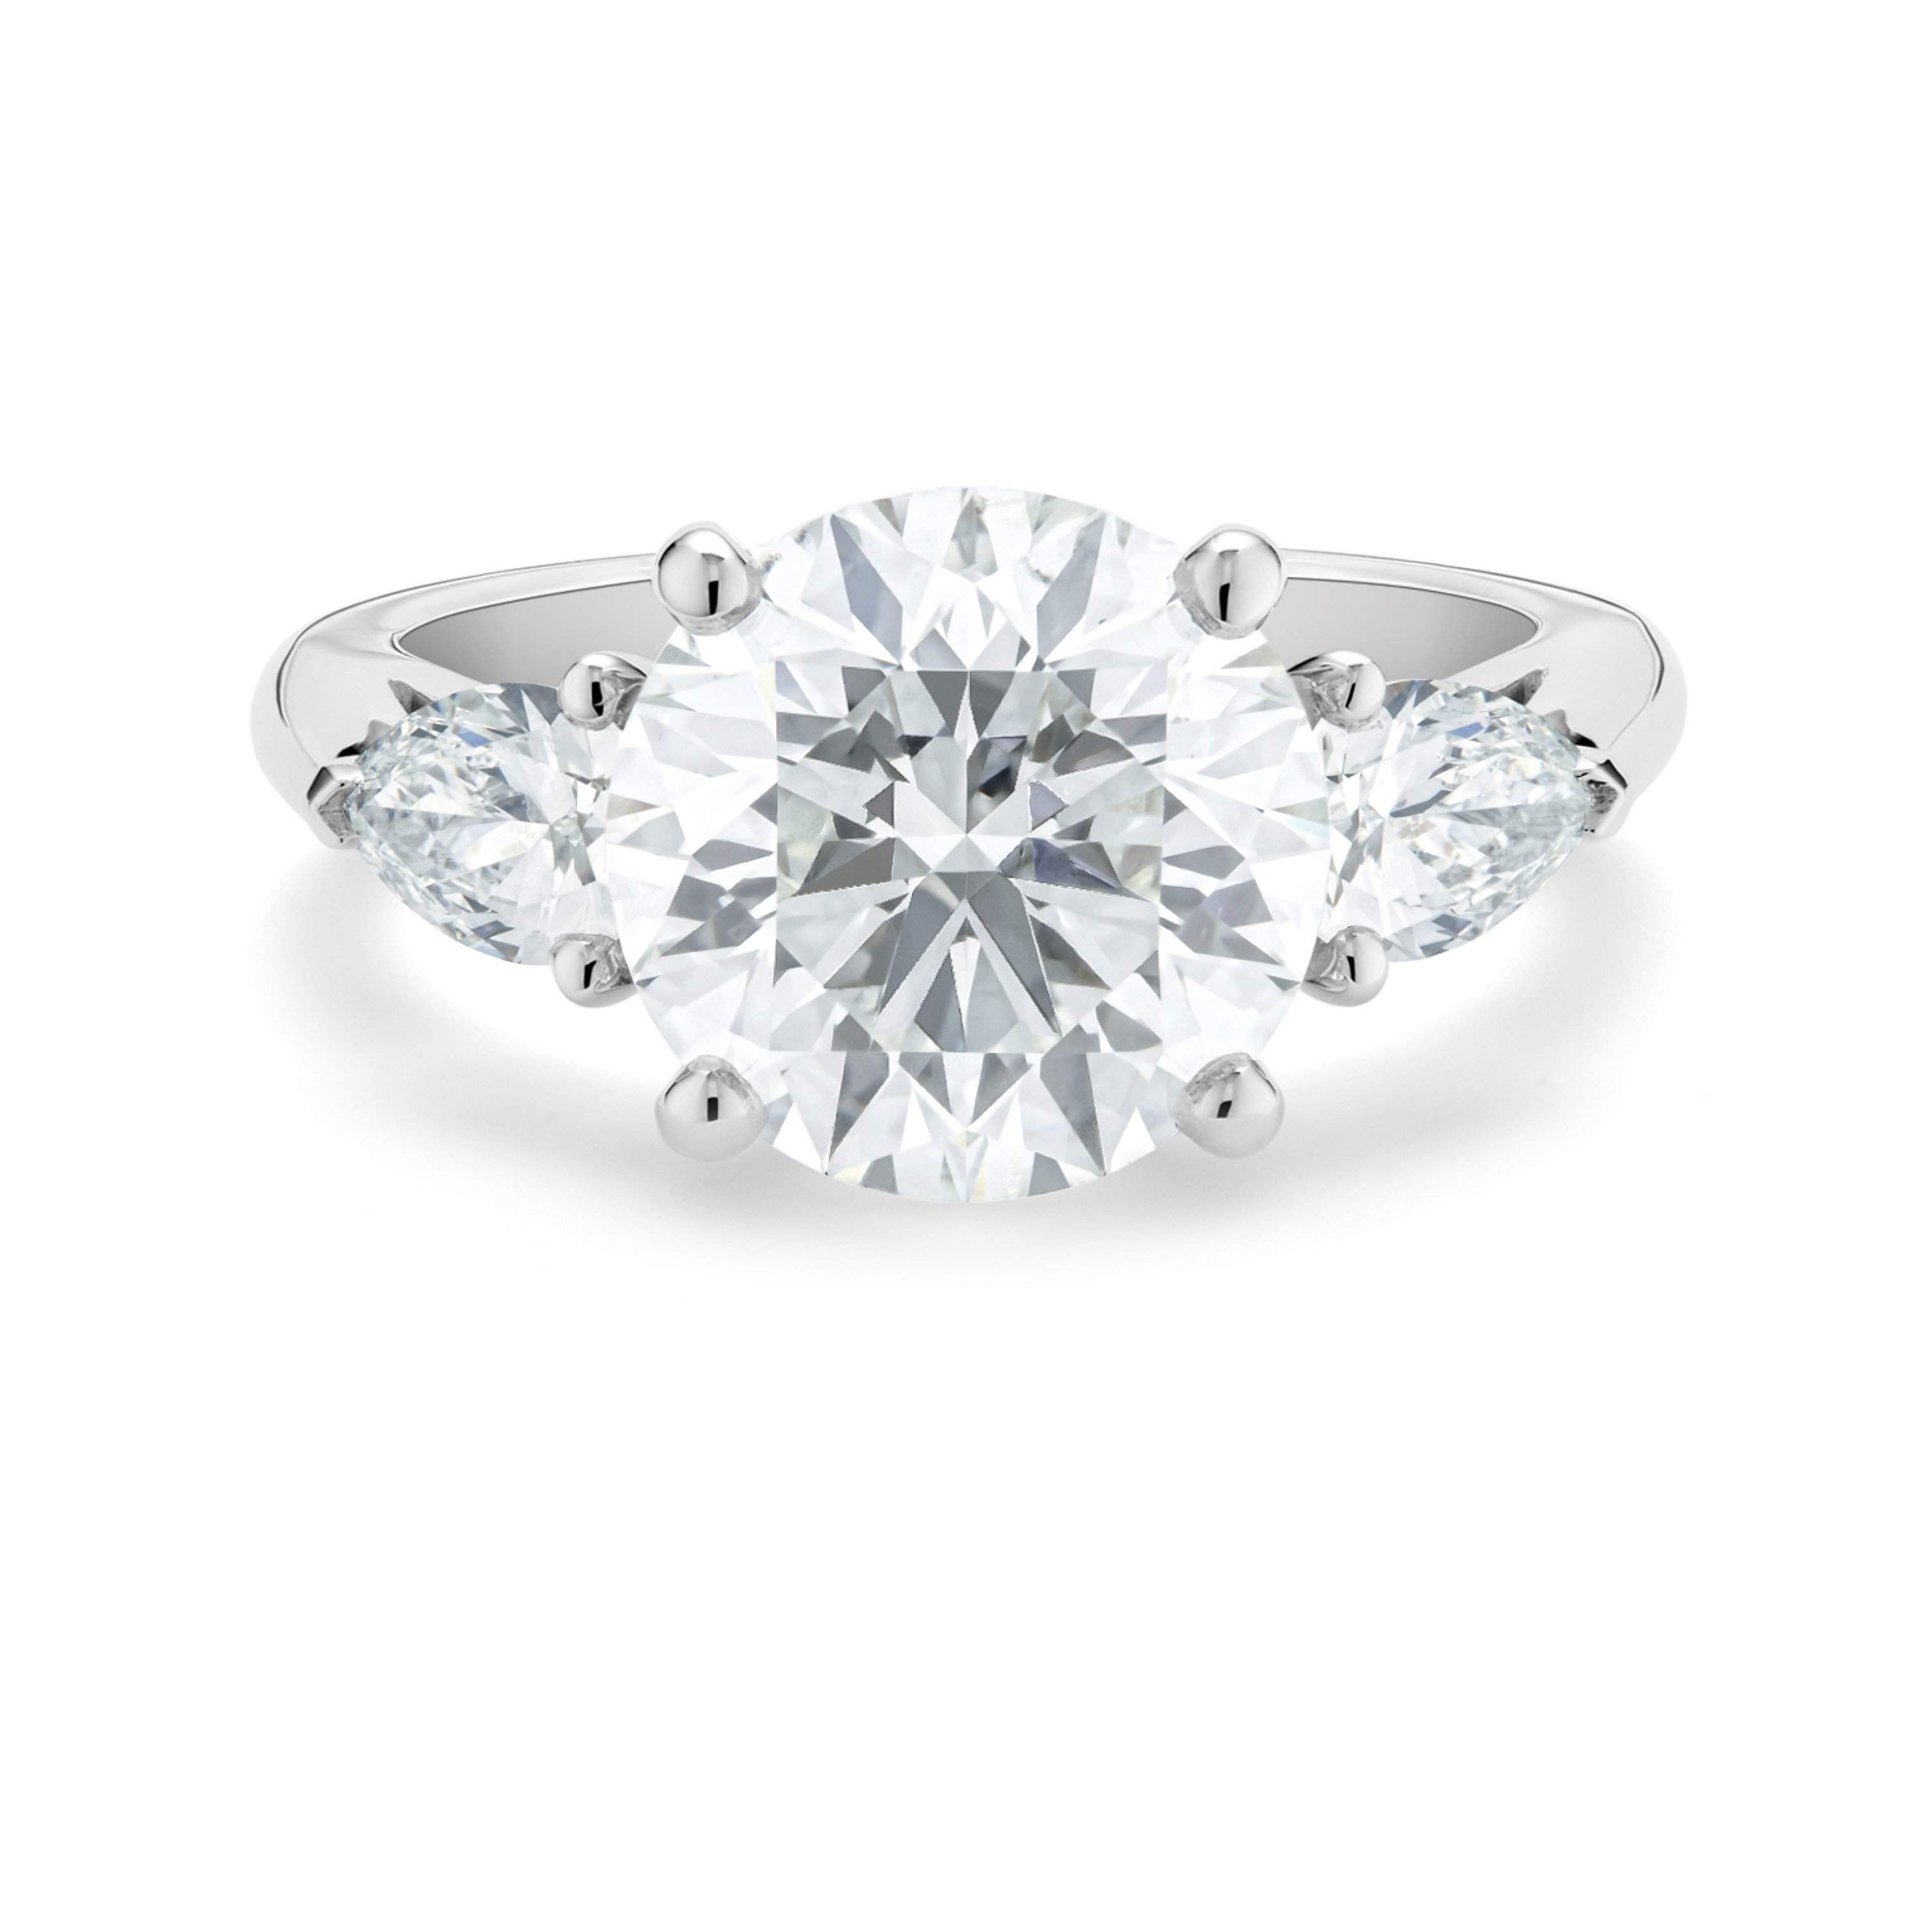 DB Classic round brilliant and pear-shaped diamond ring, image 1